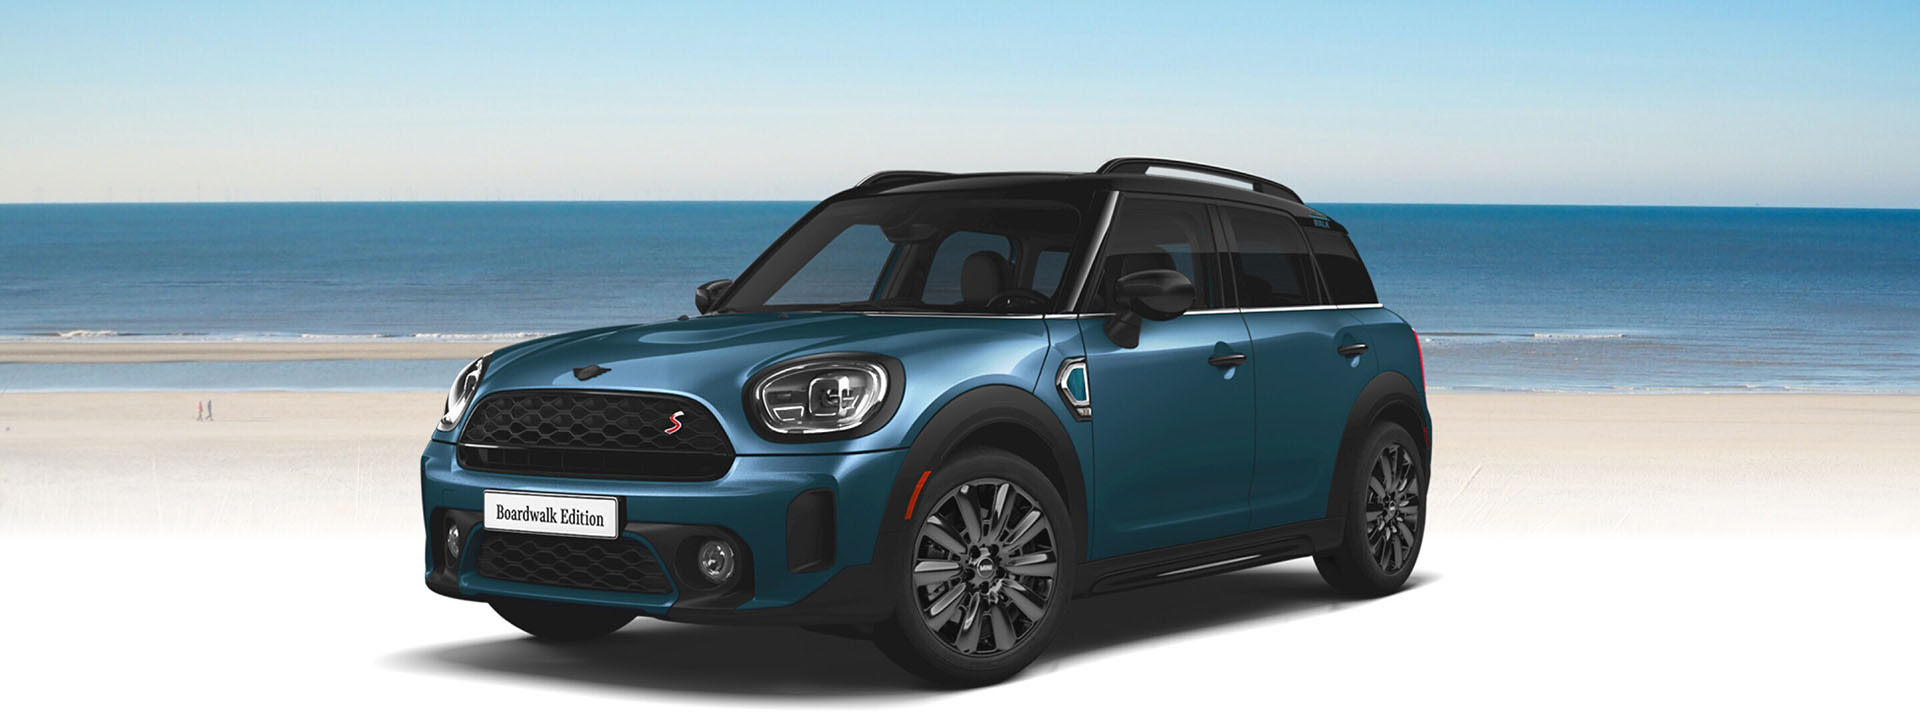 The MINI Countryman Boardwalk Edition parked in front of a beach landscape. 